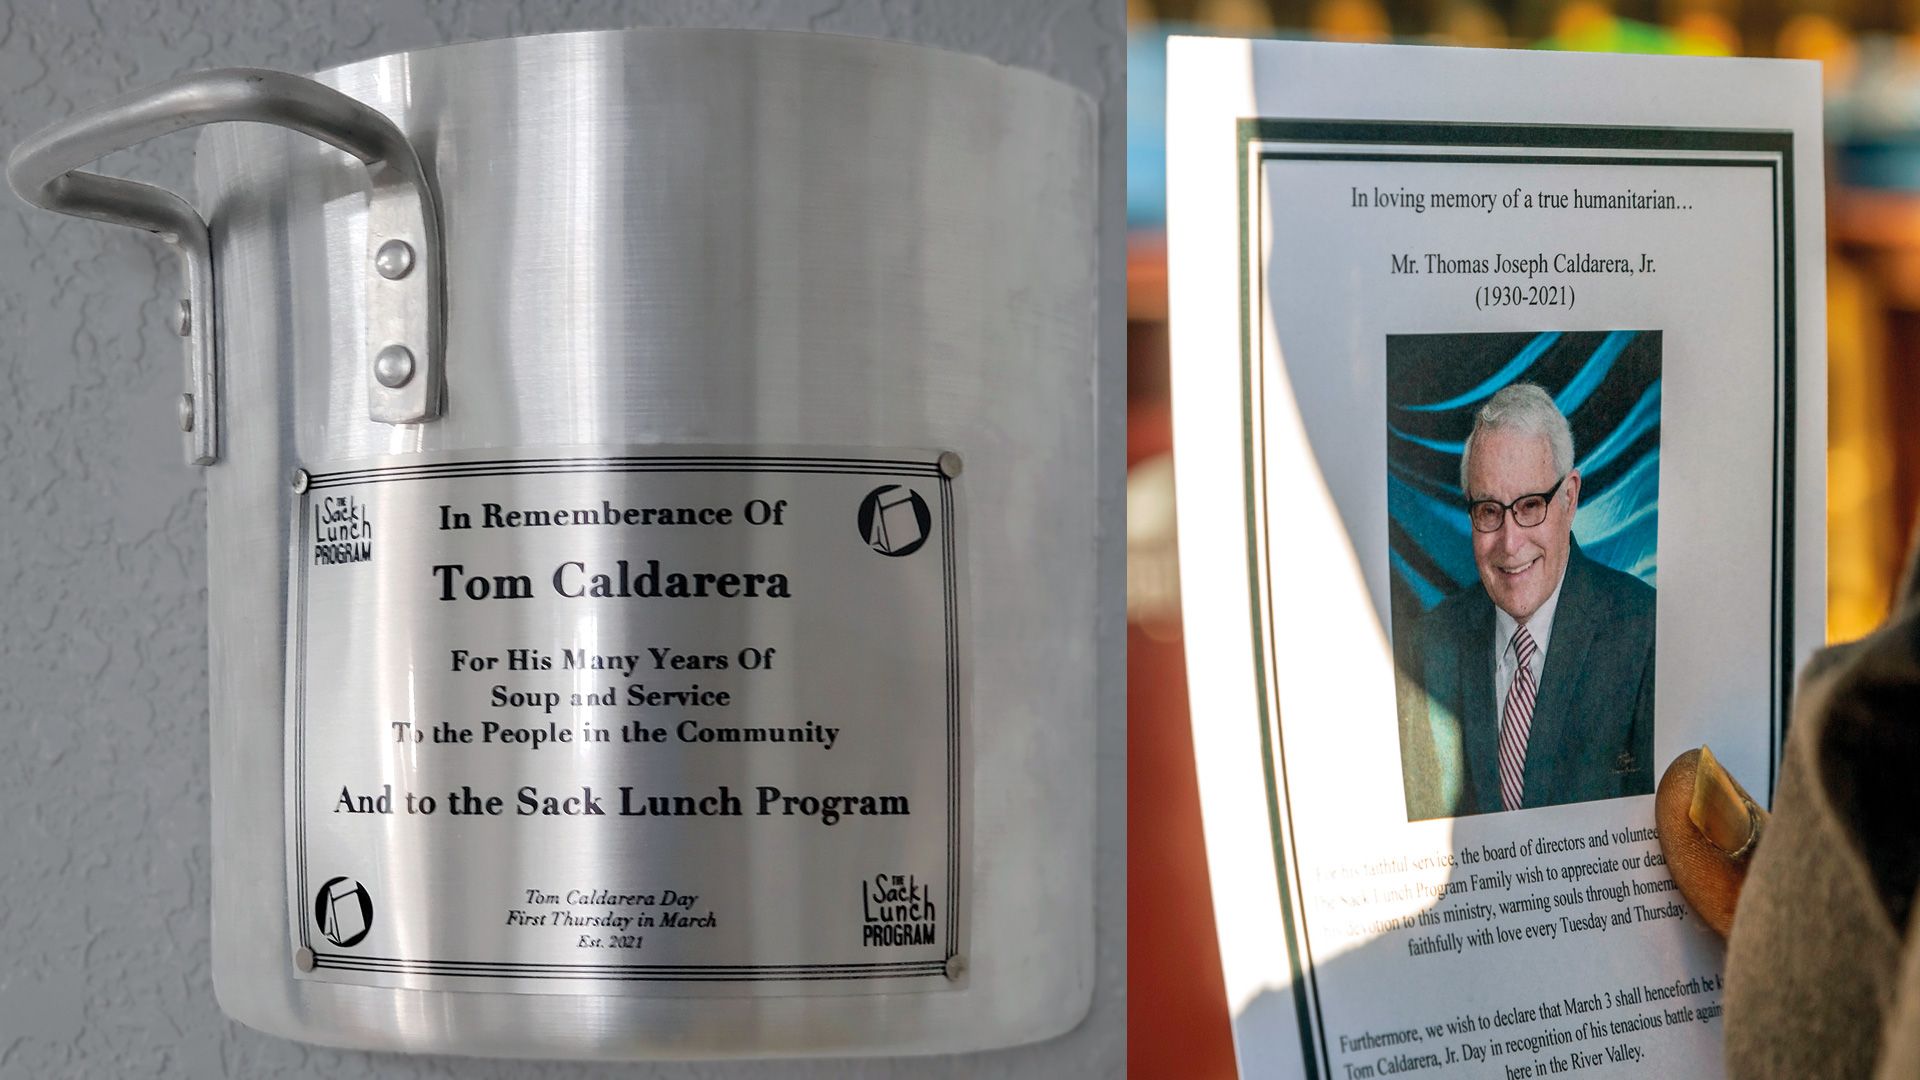 Soup and Service: Mr. Tom Caldarera honored